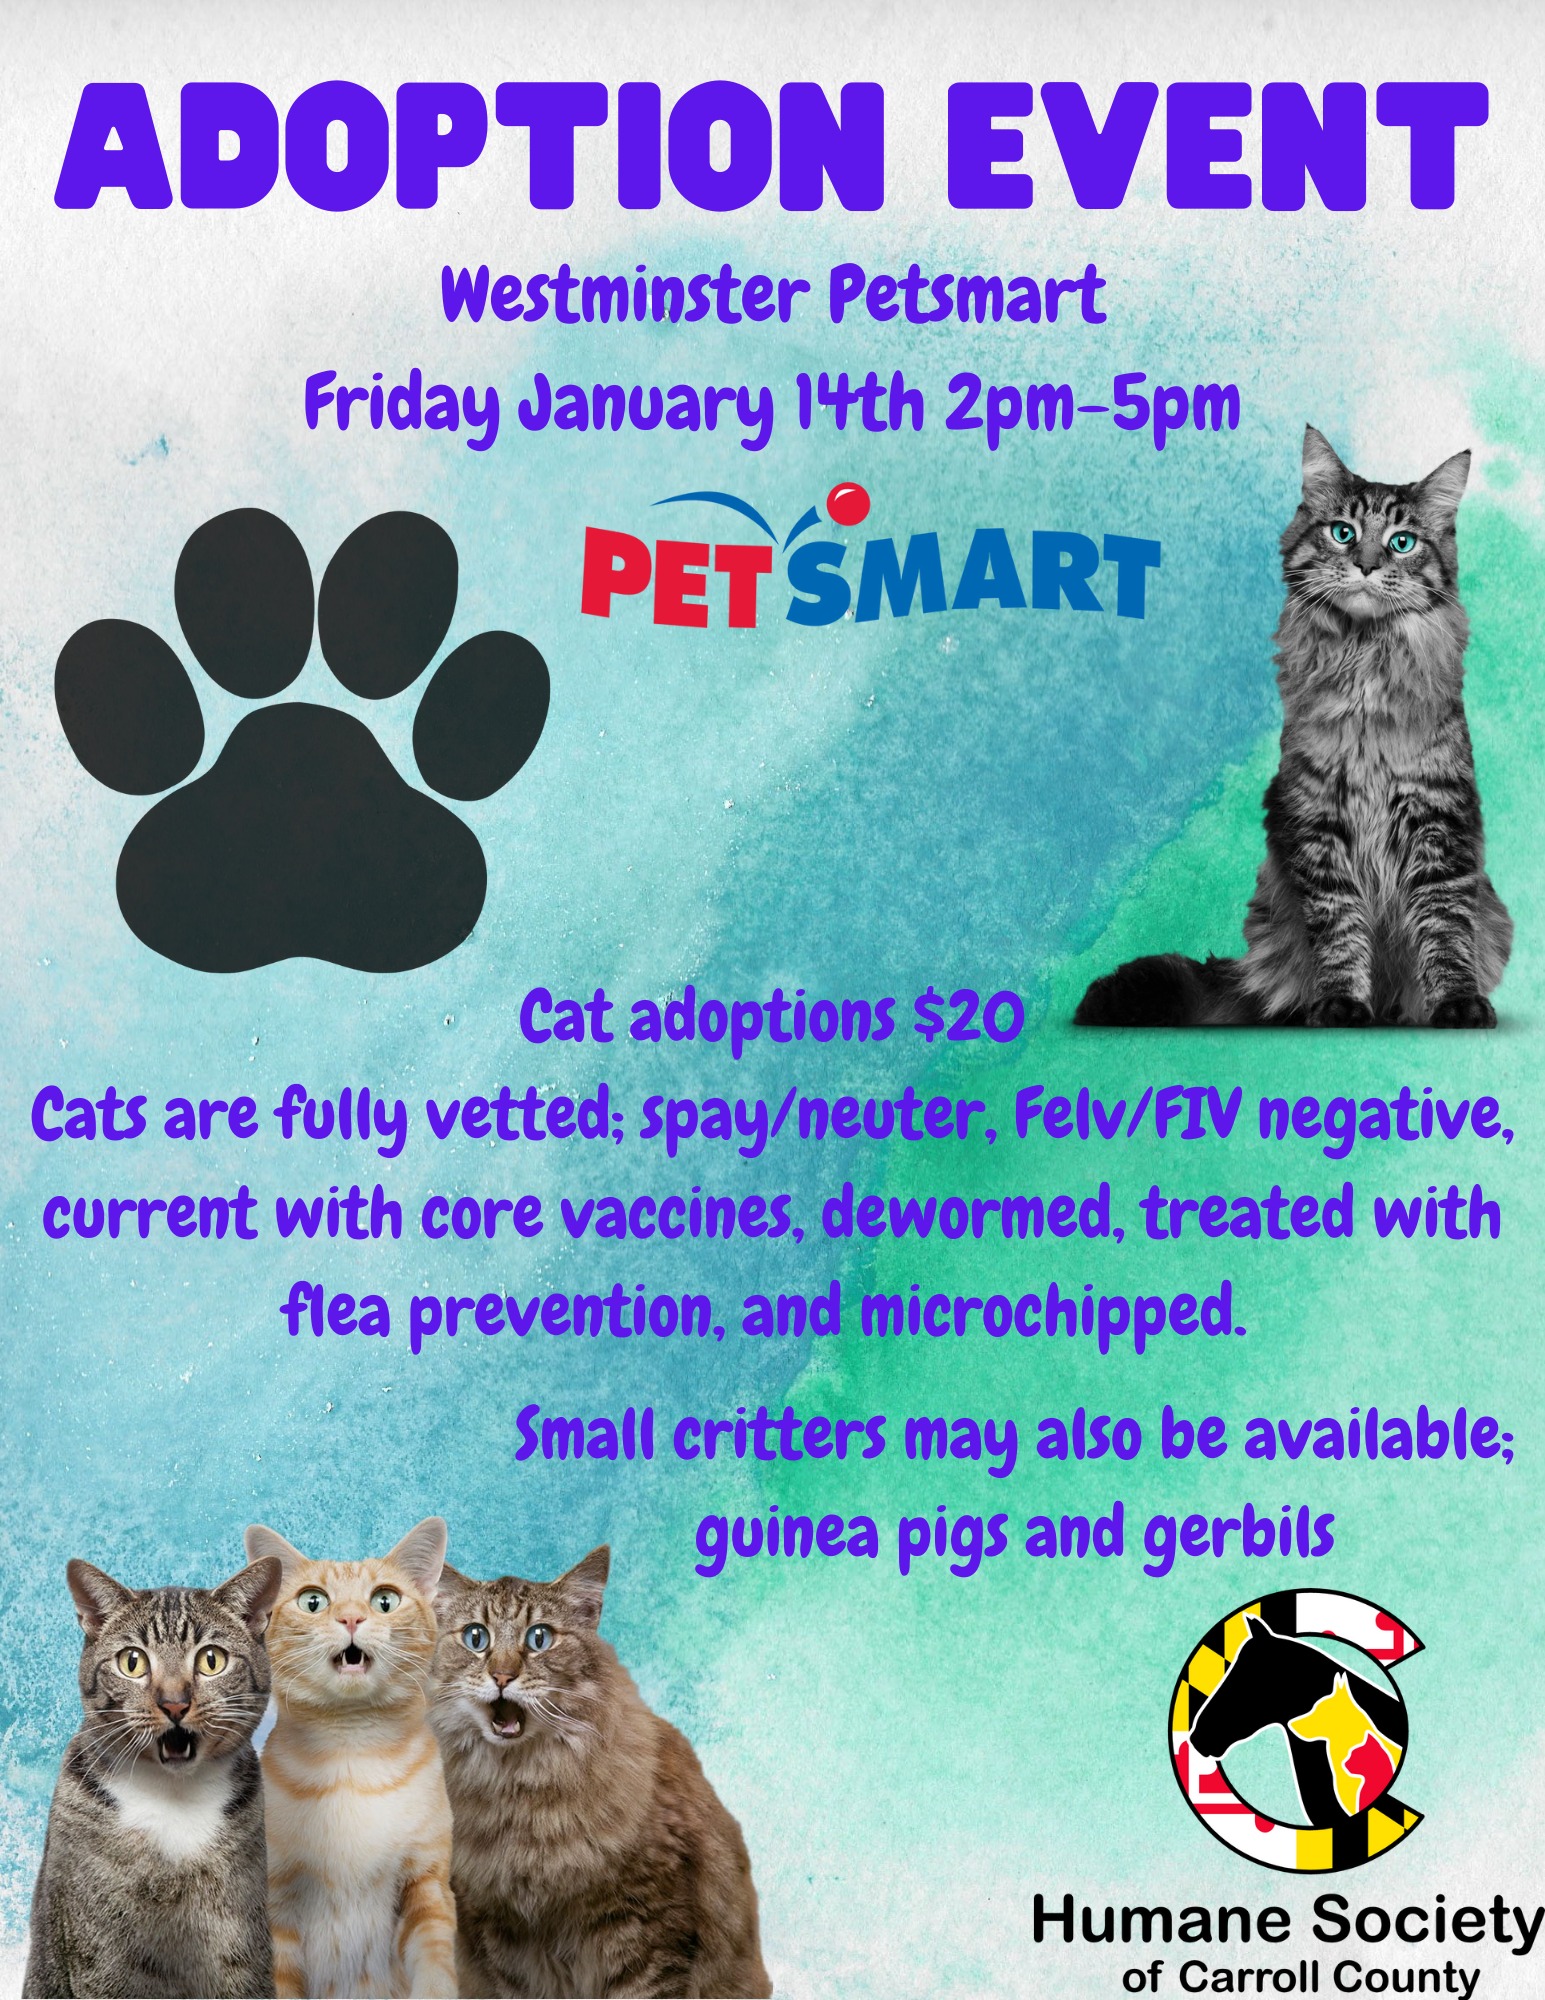 petsmart-adoption-event-westminster-humane-society-of-carroll-county